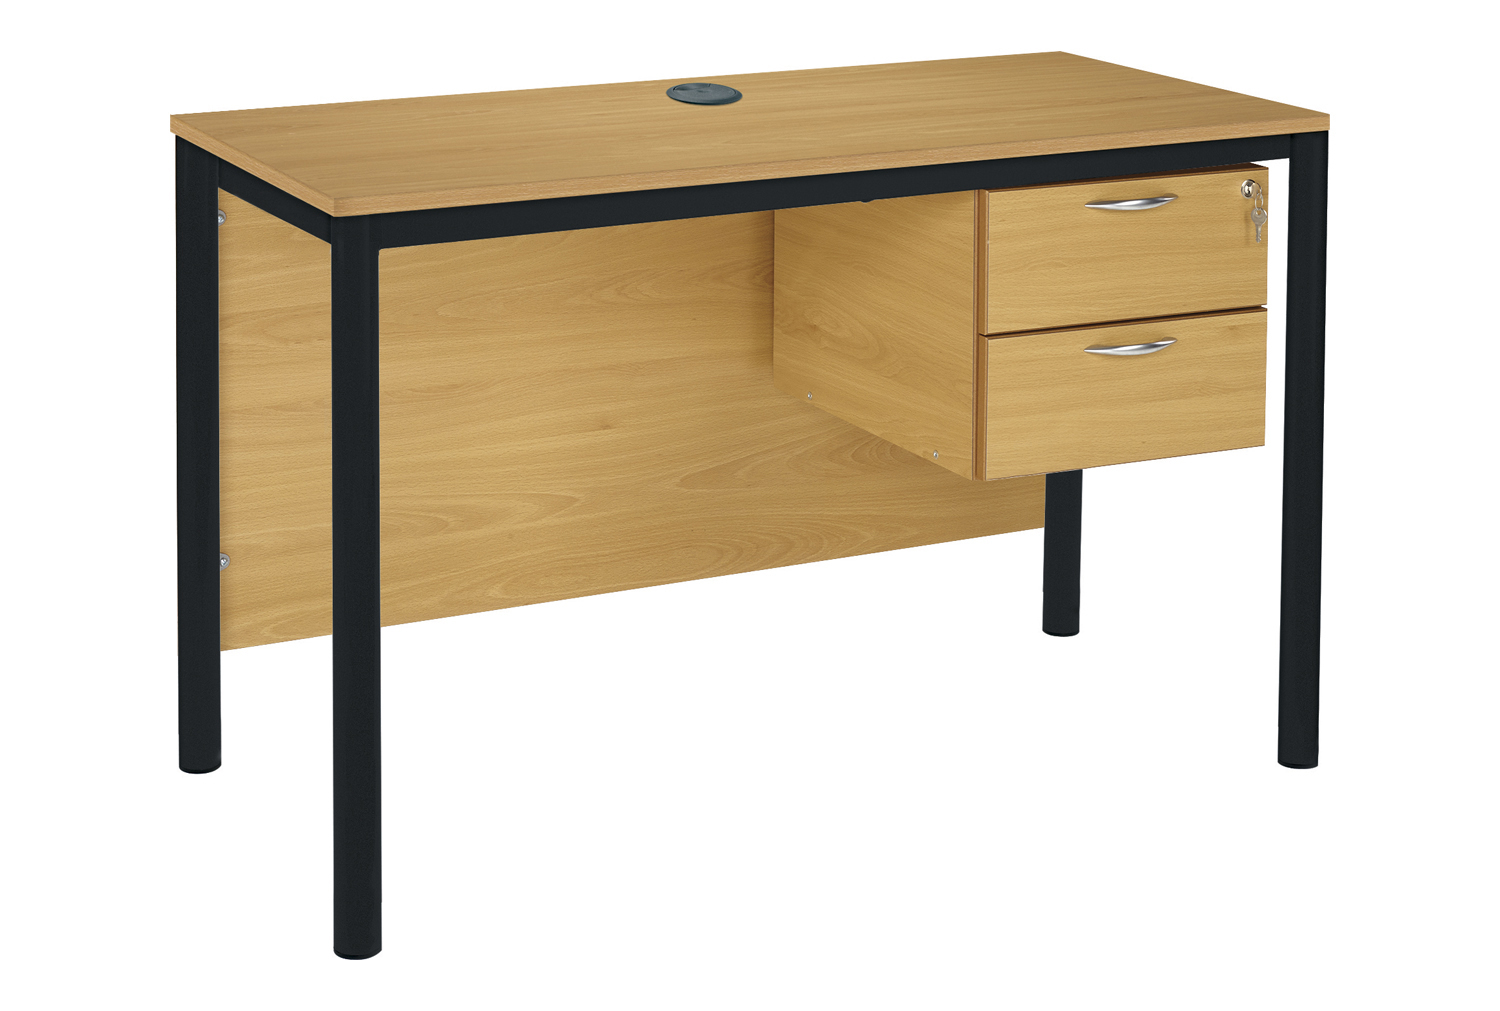 RT45 Teachers Desk With 2 Drawers & Cable Ports 120x60cm, 120wx60dx72h (cm), Black Frame, Maple Top, ABS Maple Edge